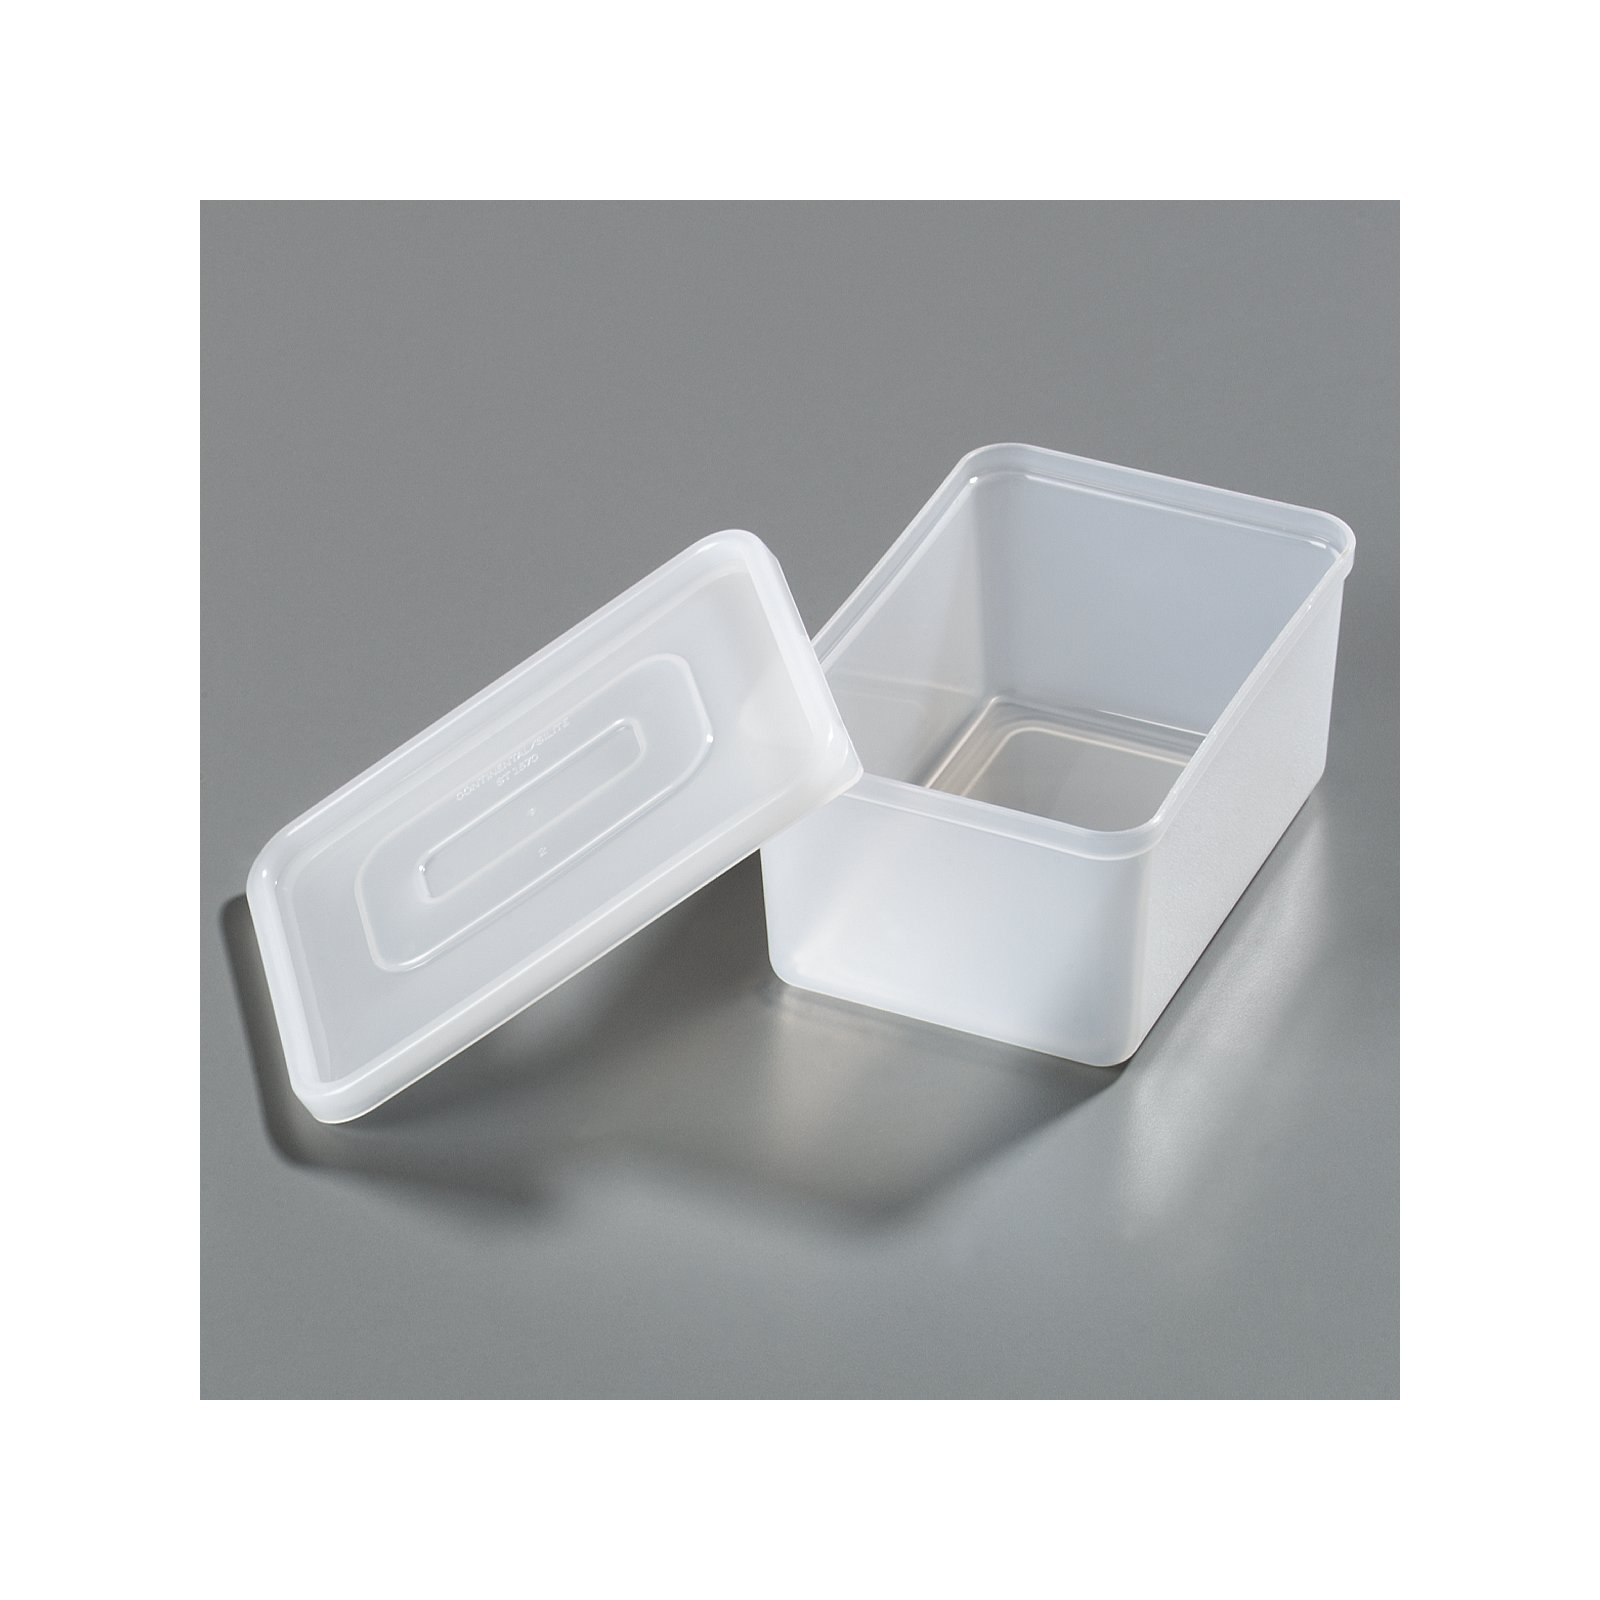 SS10702 - Replacement 1-1/4 Pint Containers/Lids 5-1/4, 3-3/4, 2-3/4 -  White